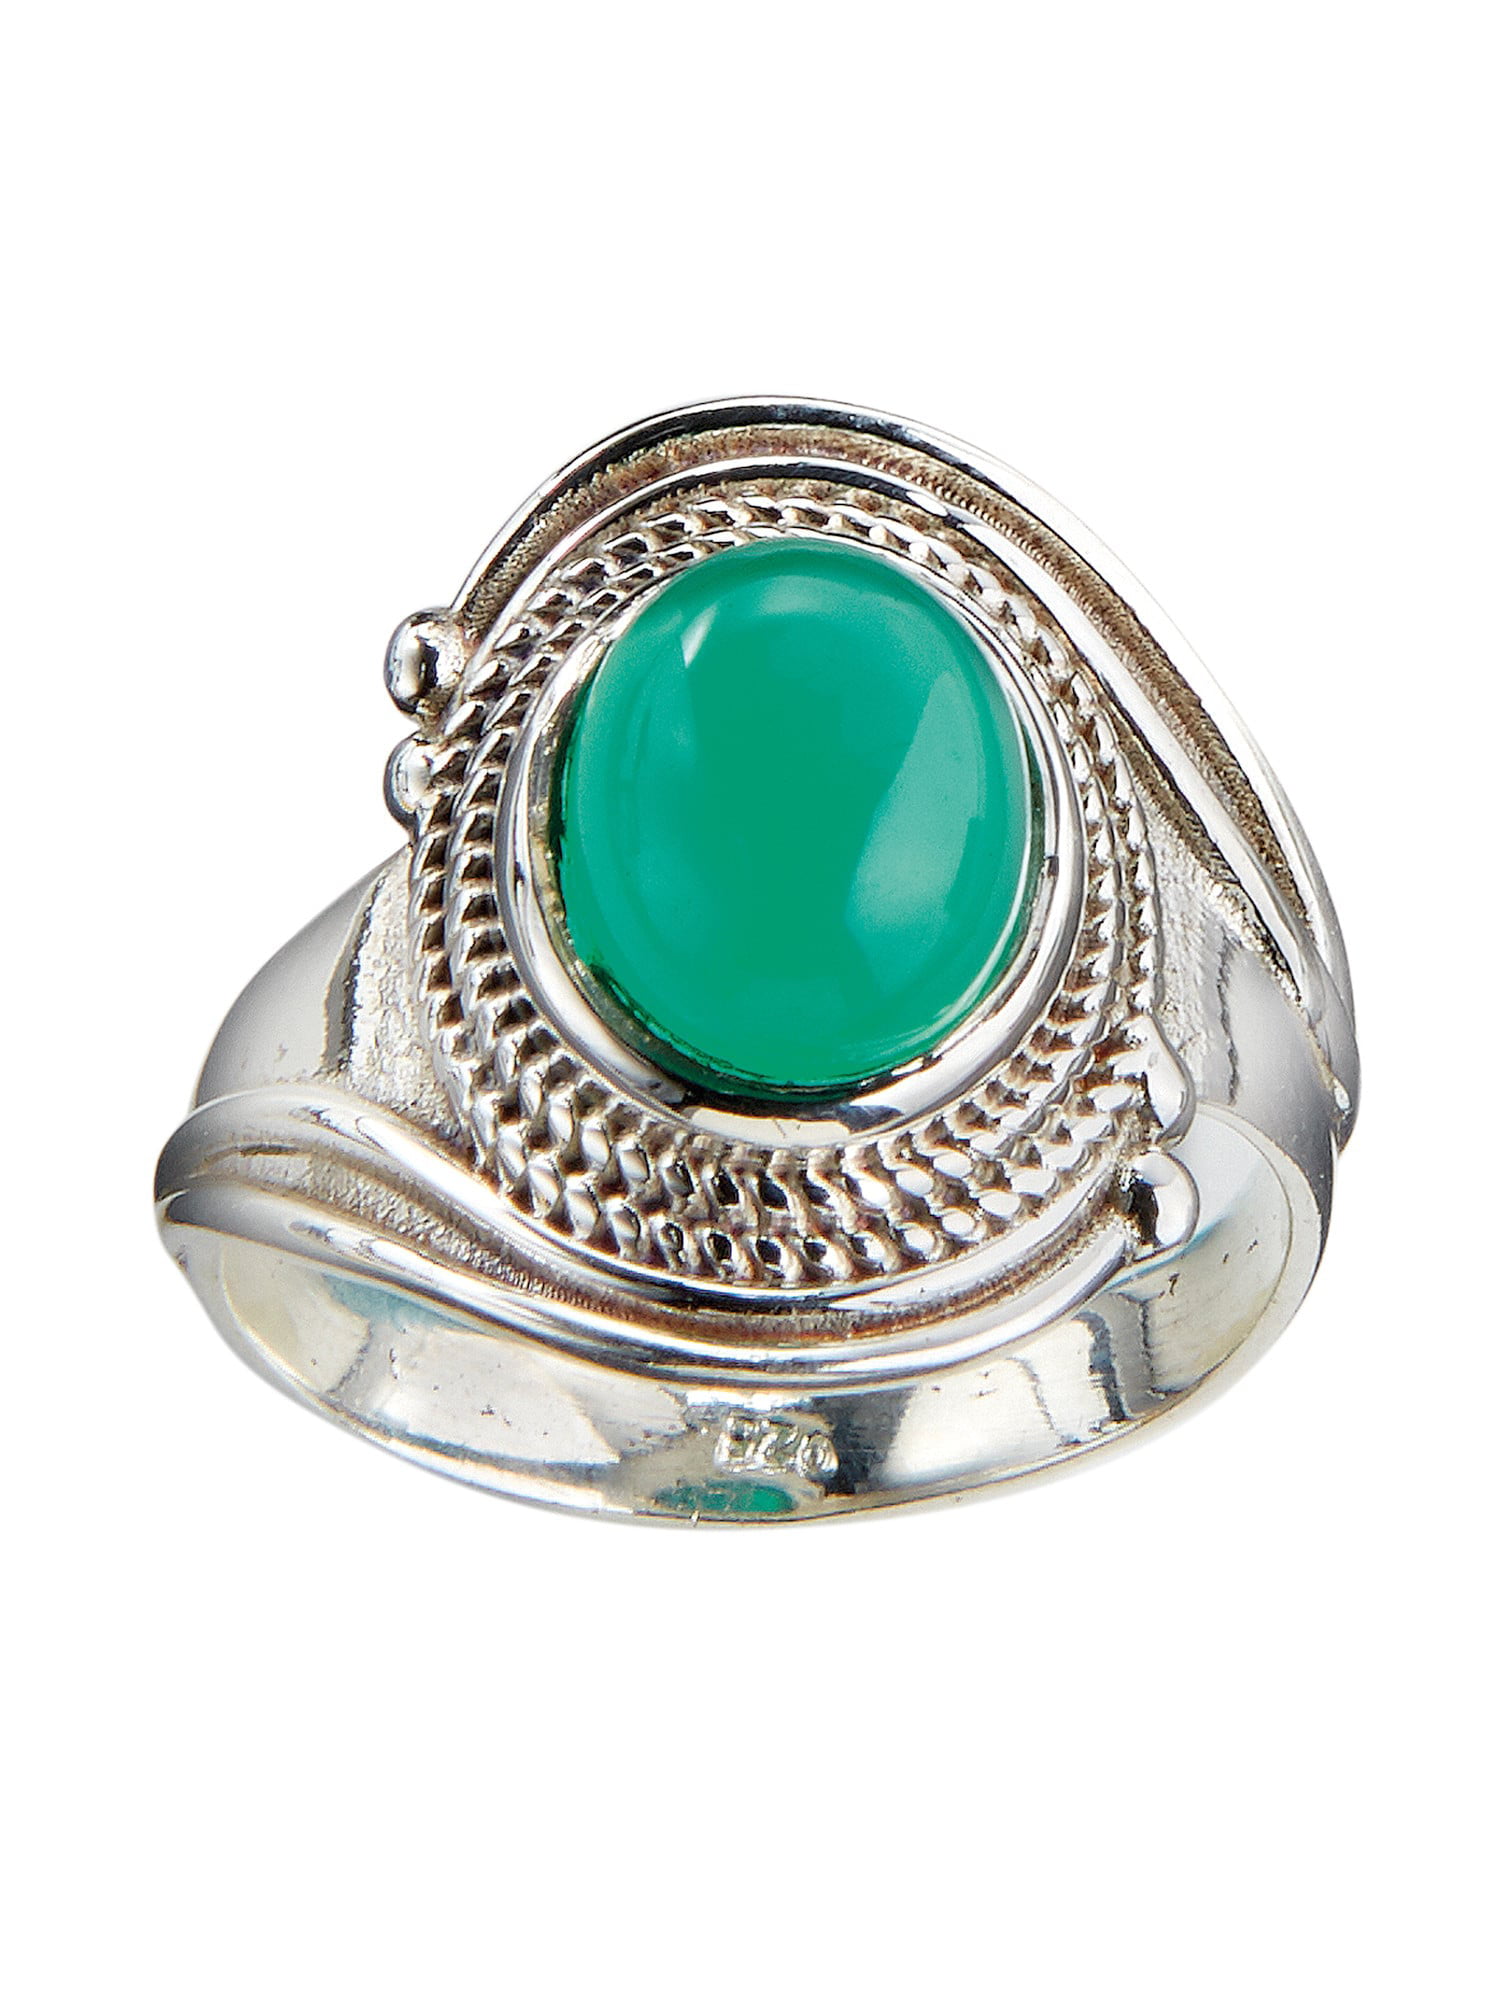 Natural Green Onyx Gemstone Designer Jewelry Solid 925 Sterling Silver Two Tone Ring Size 7